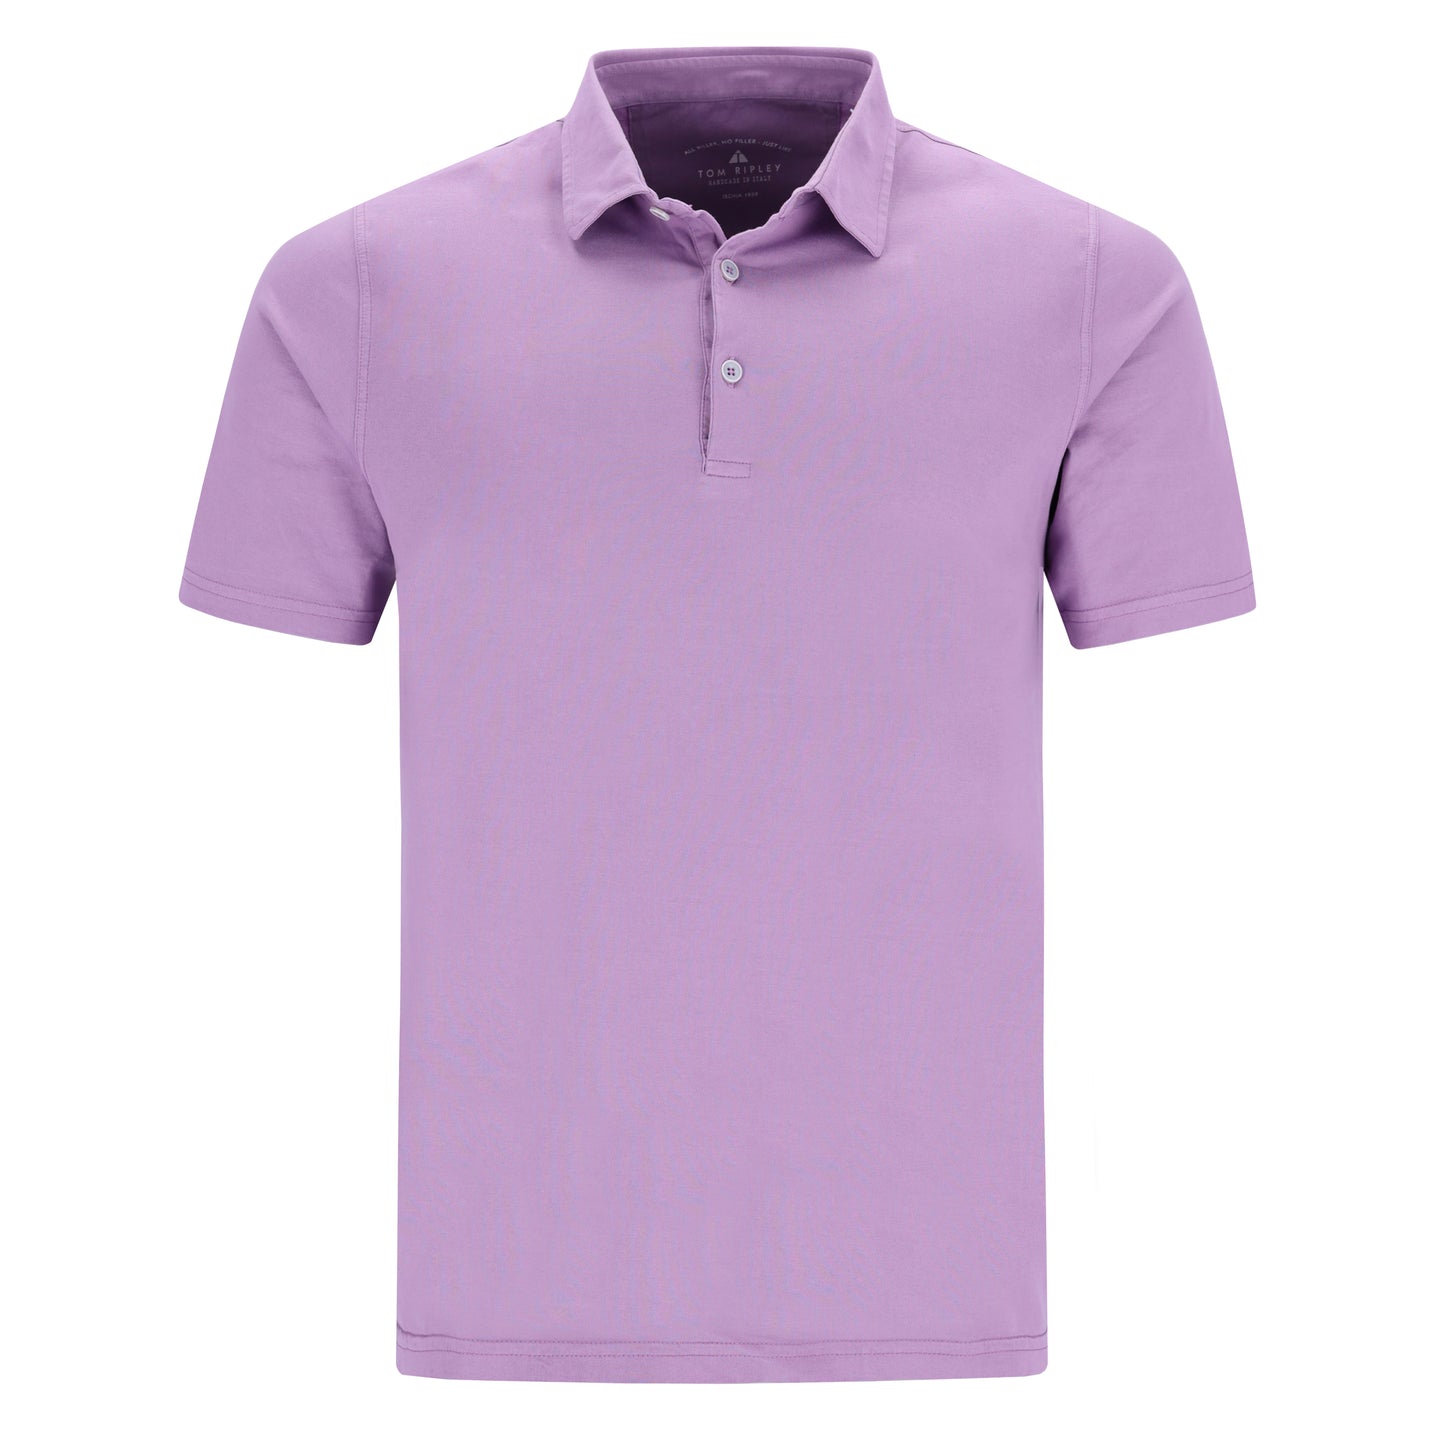 Essential jersey polo shirt Supima® cotton ANDREW